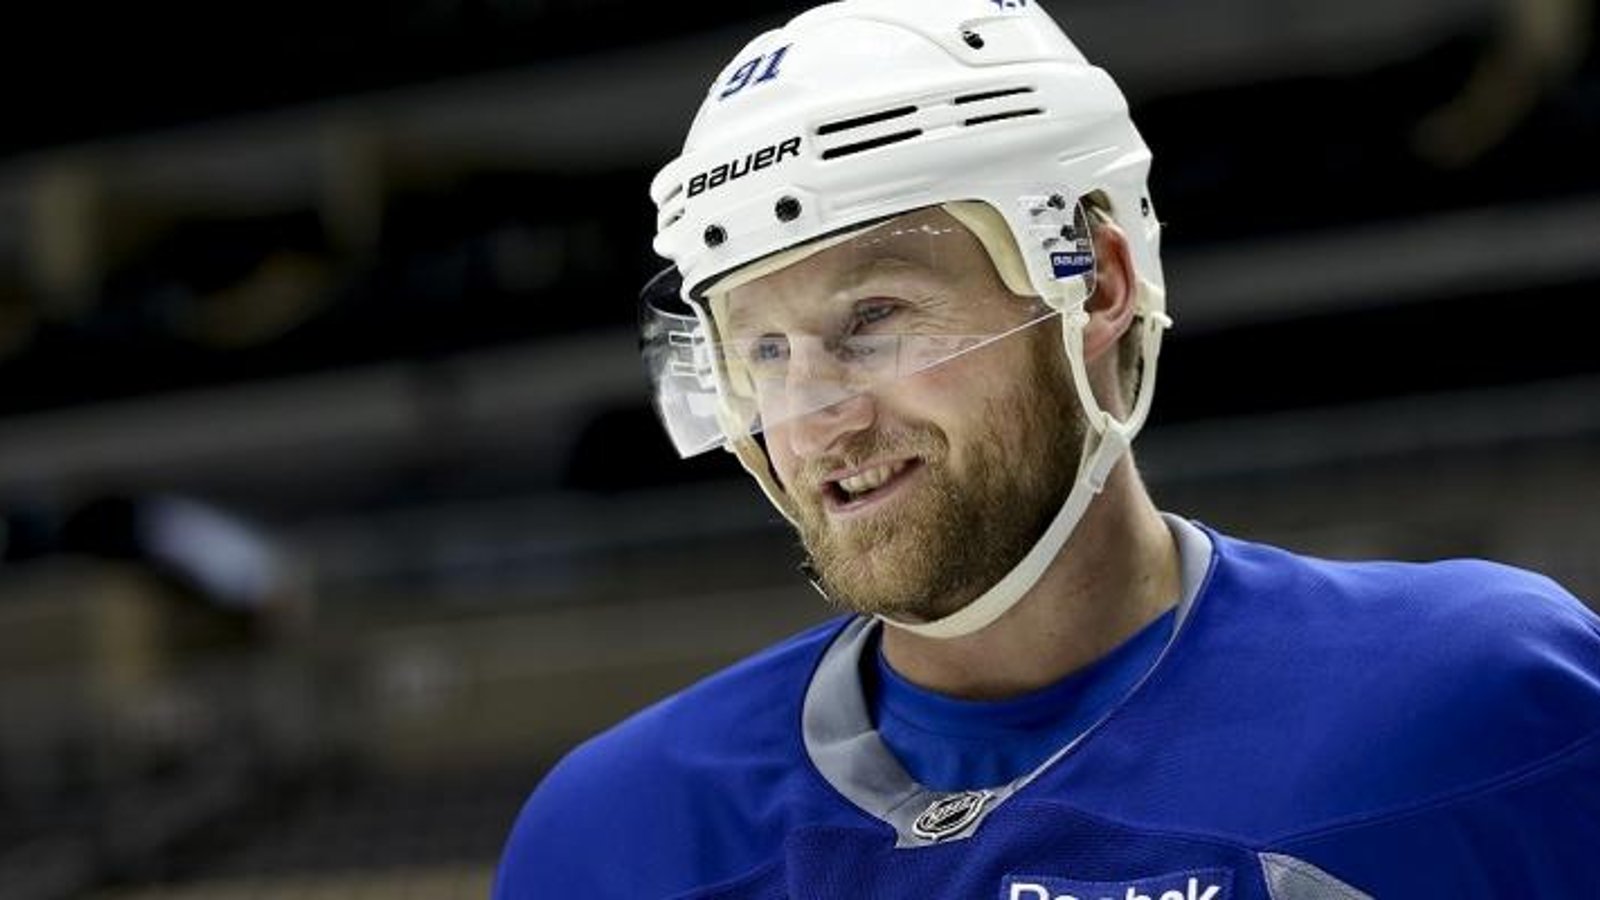 Breaking: Insider reports something big is coming from Stamkos today.